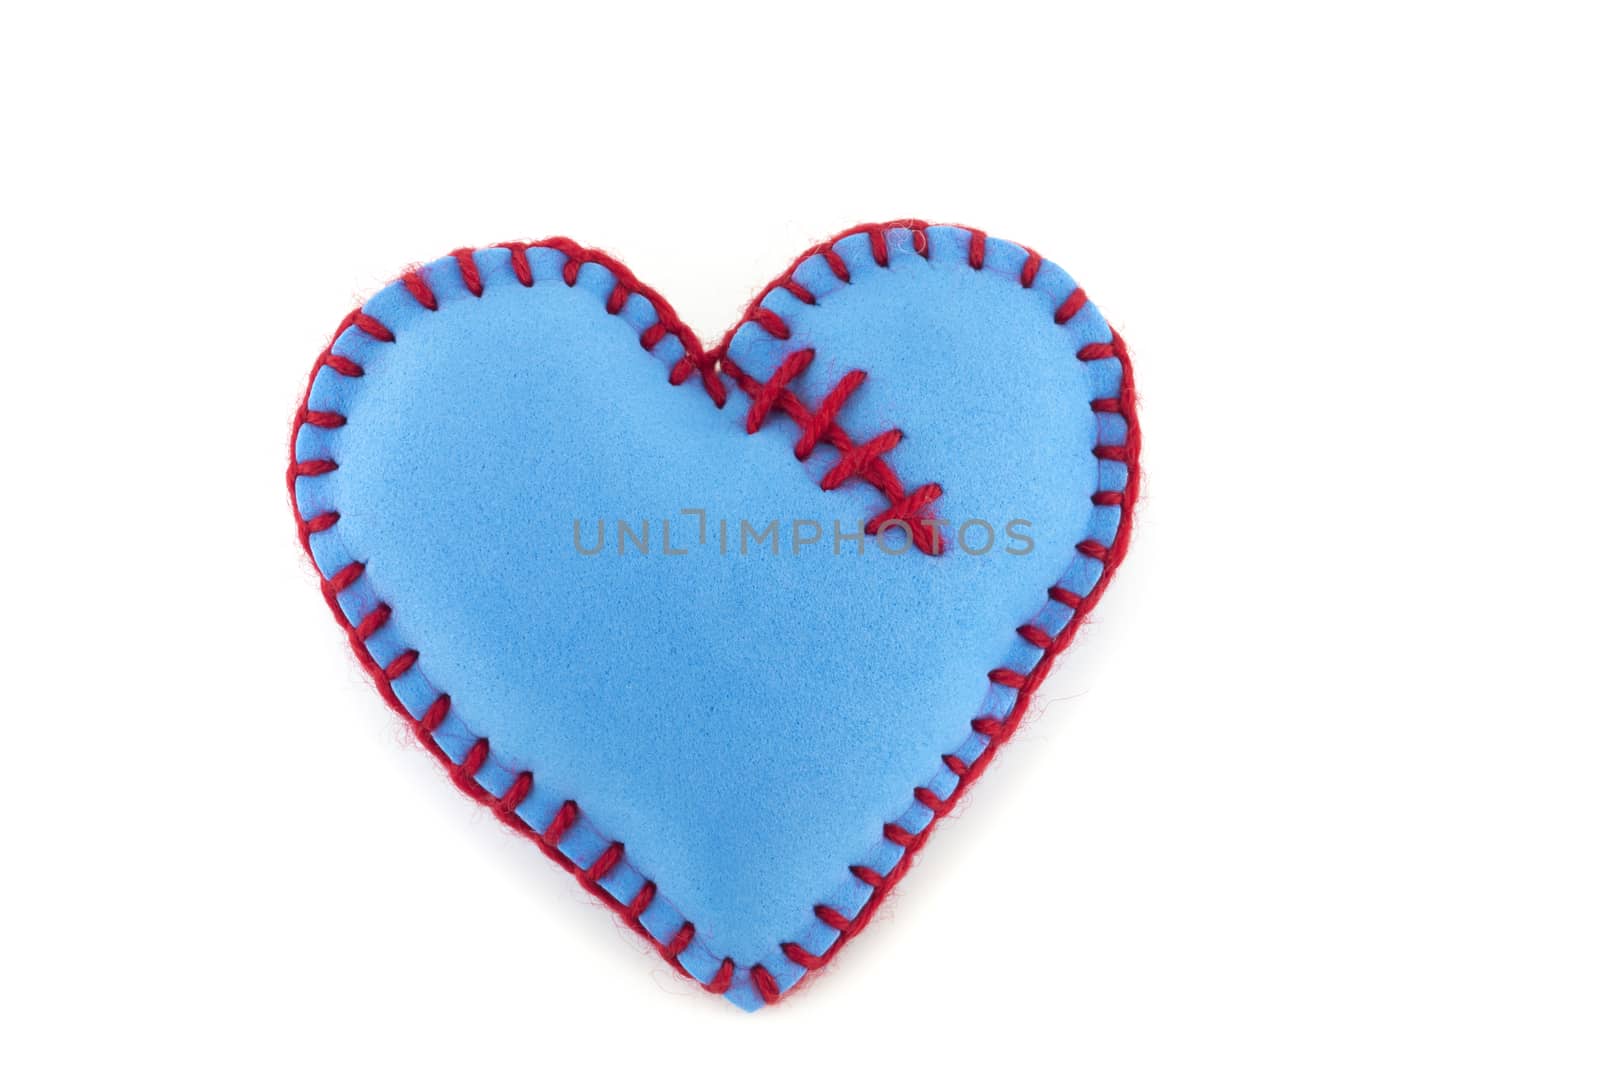 One handmade blue felt stitched toy heart on white background. Love, relationship, Valentines Day, broken heart concept